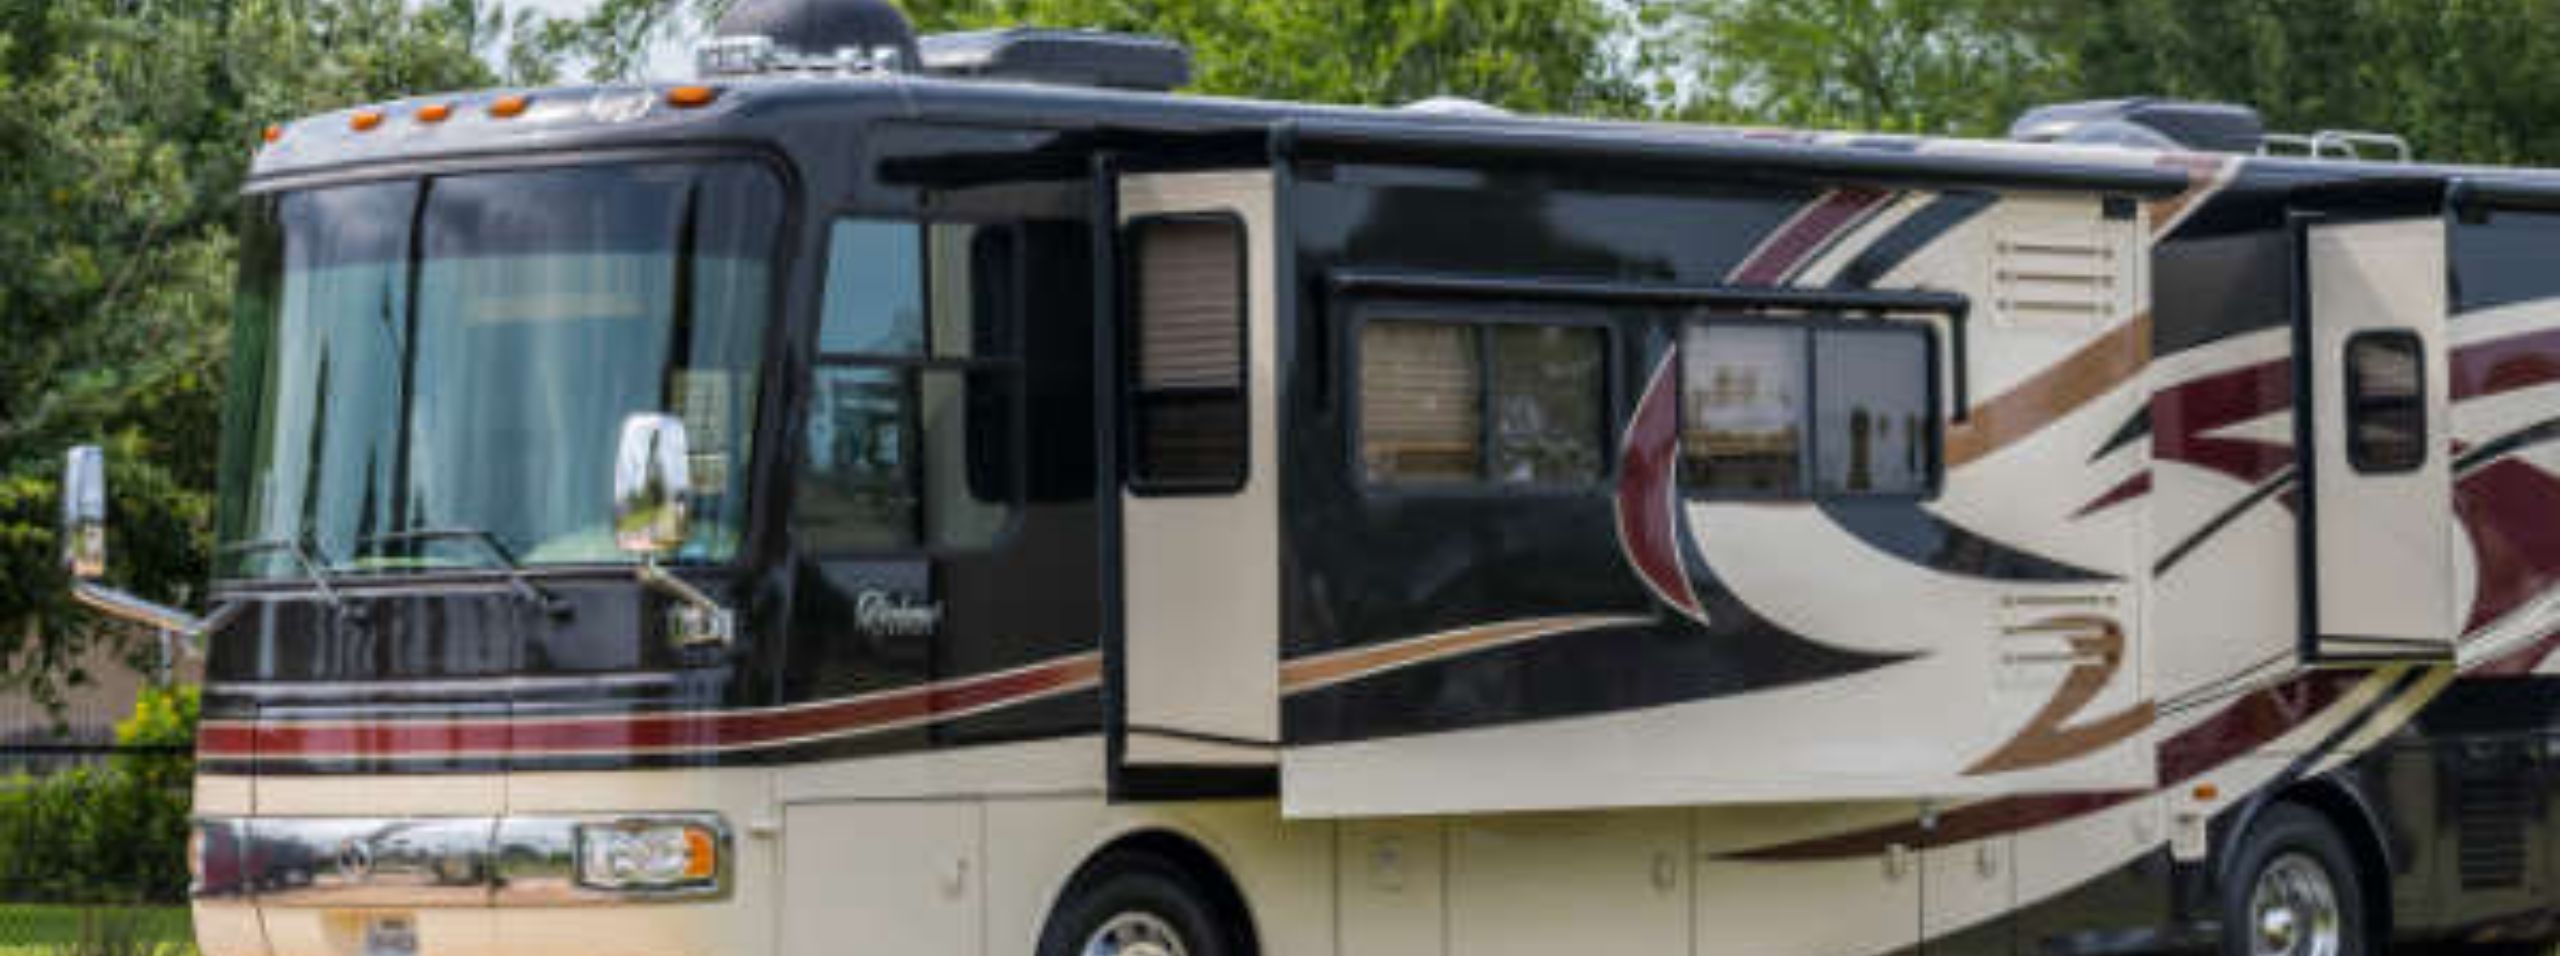 Side view of a large, modern RV parked outdoors at a luxury campsite, featuring a brown and cream color scheme with decorative swirls.